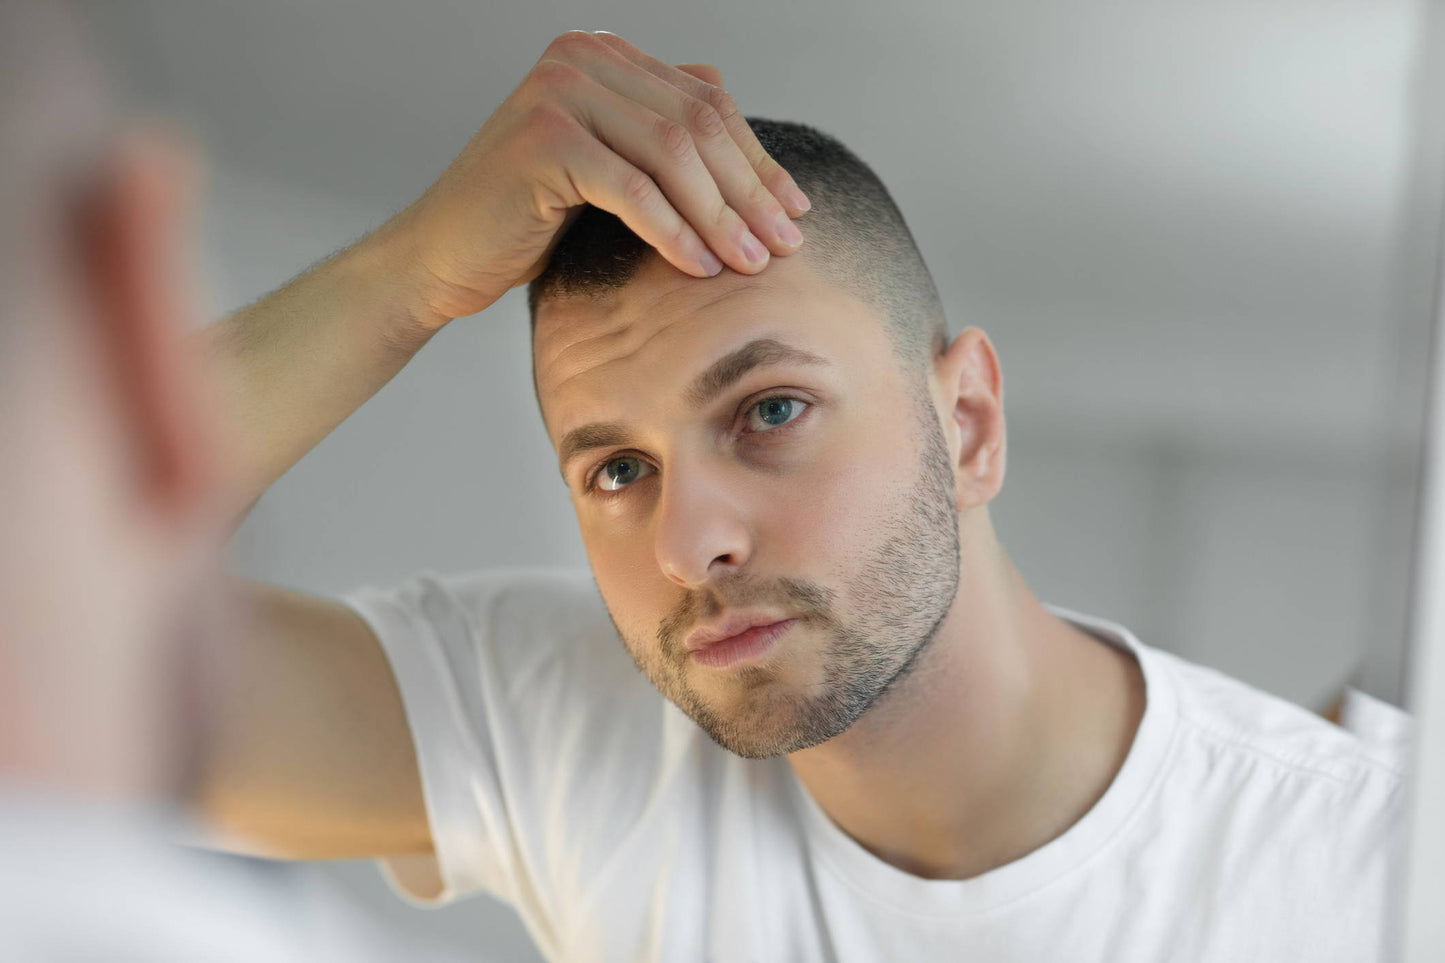 Cowlick vs Balding: What Are the Differences?